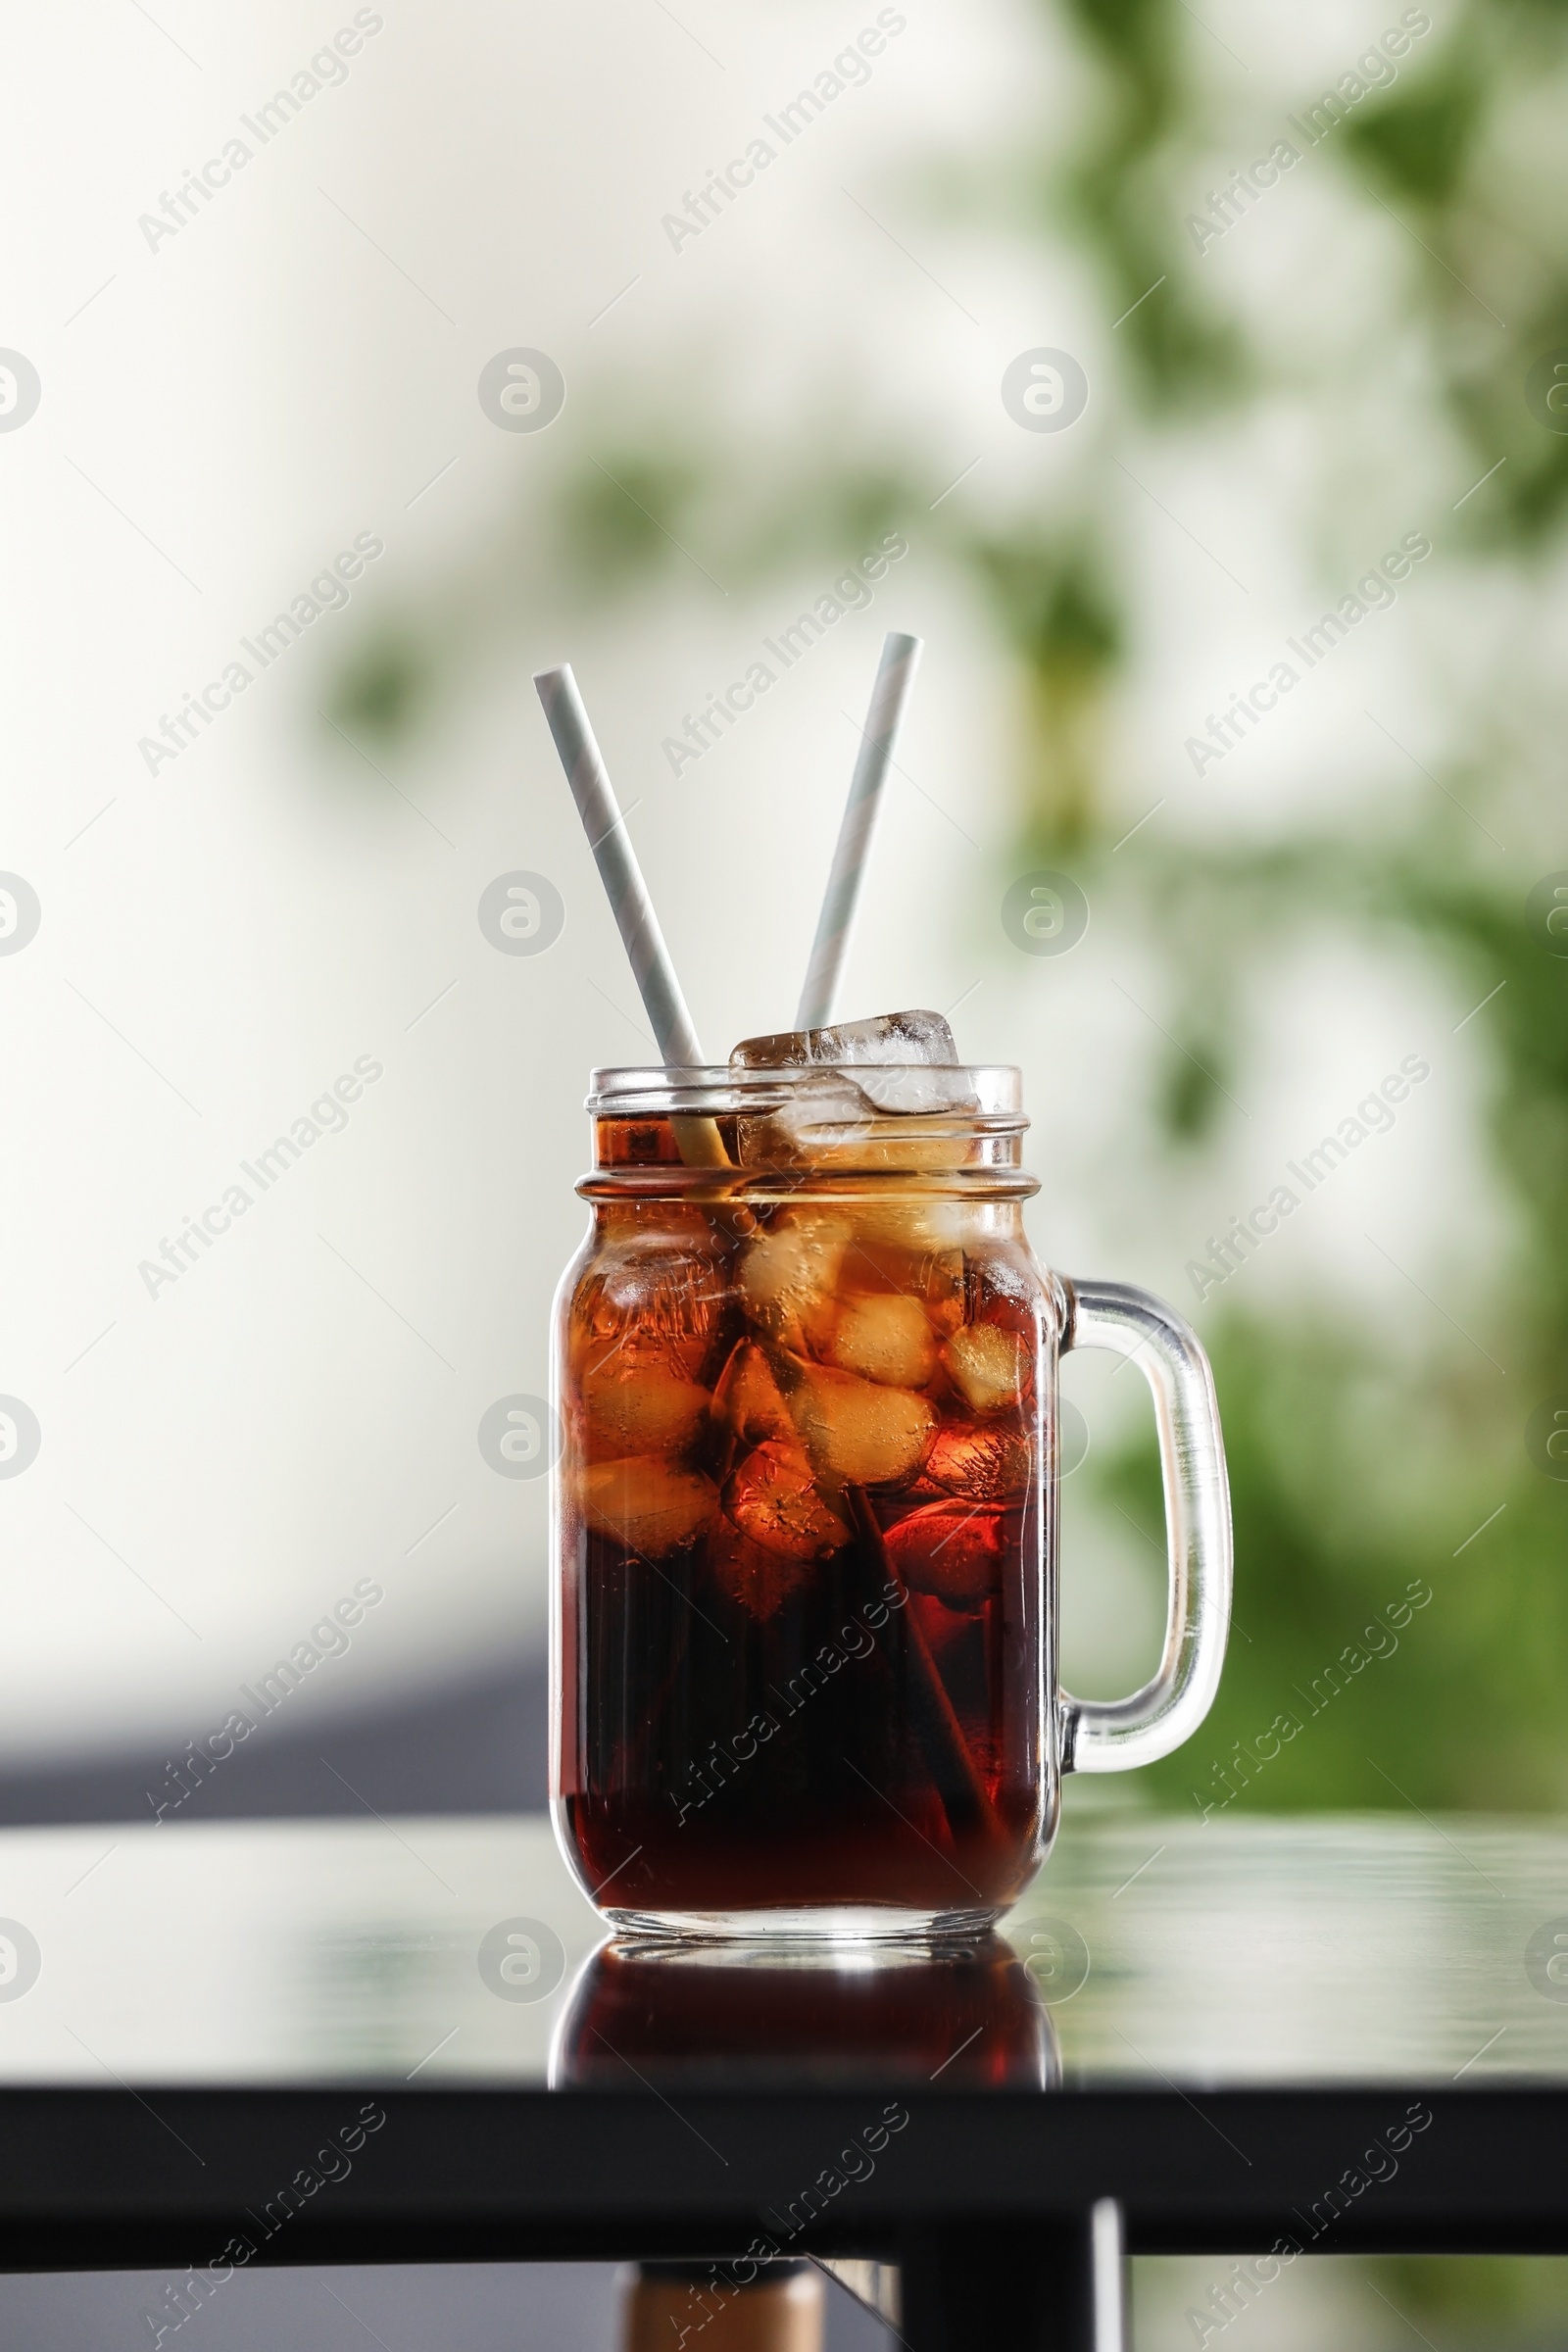 Photo of Mason jar of cola with ice on table against blurred background